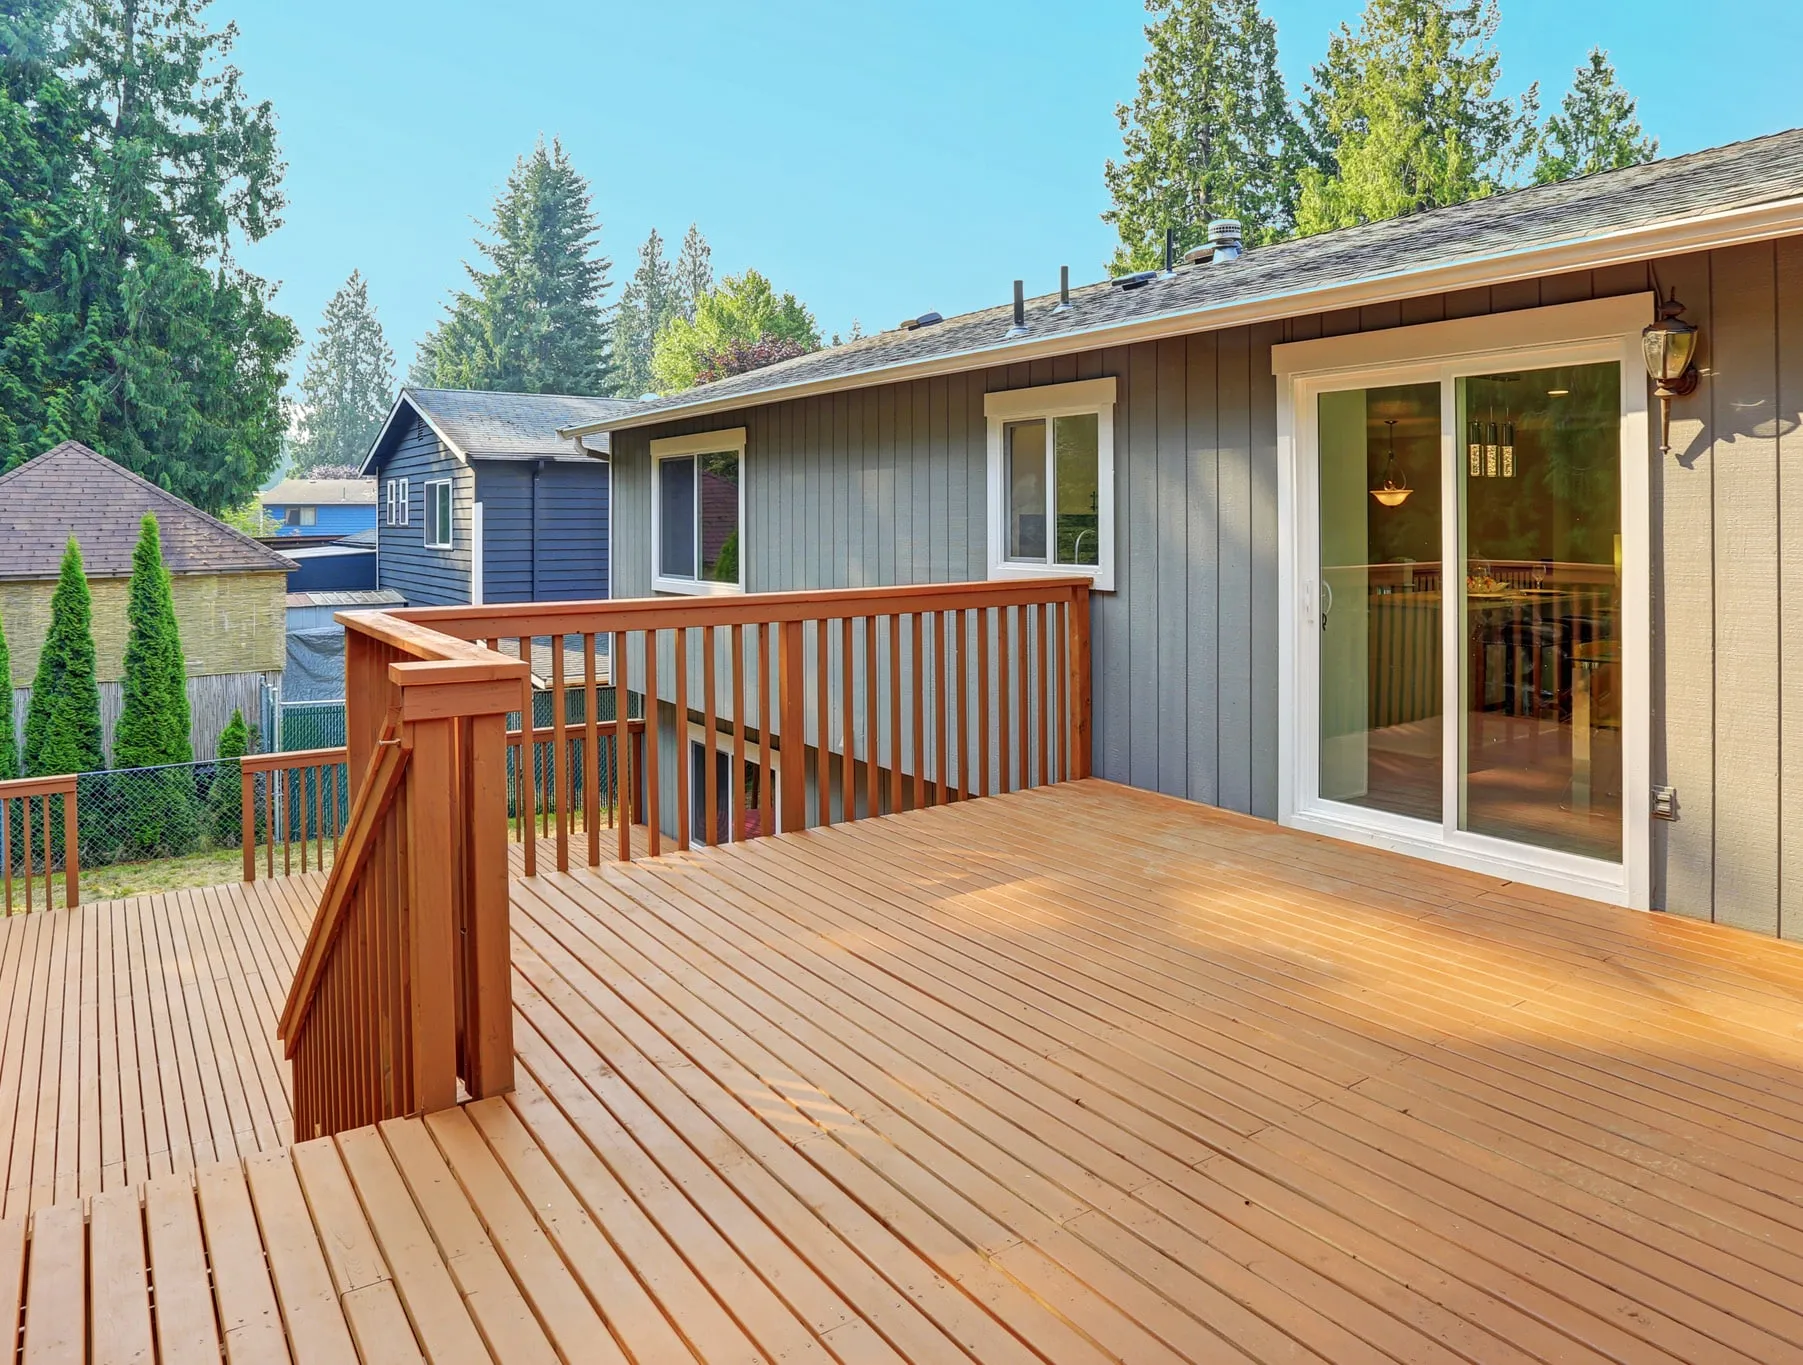 A wooden deck in front of a house